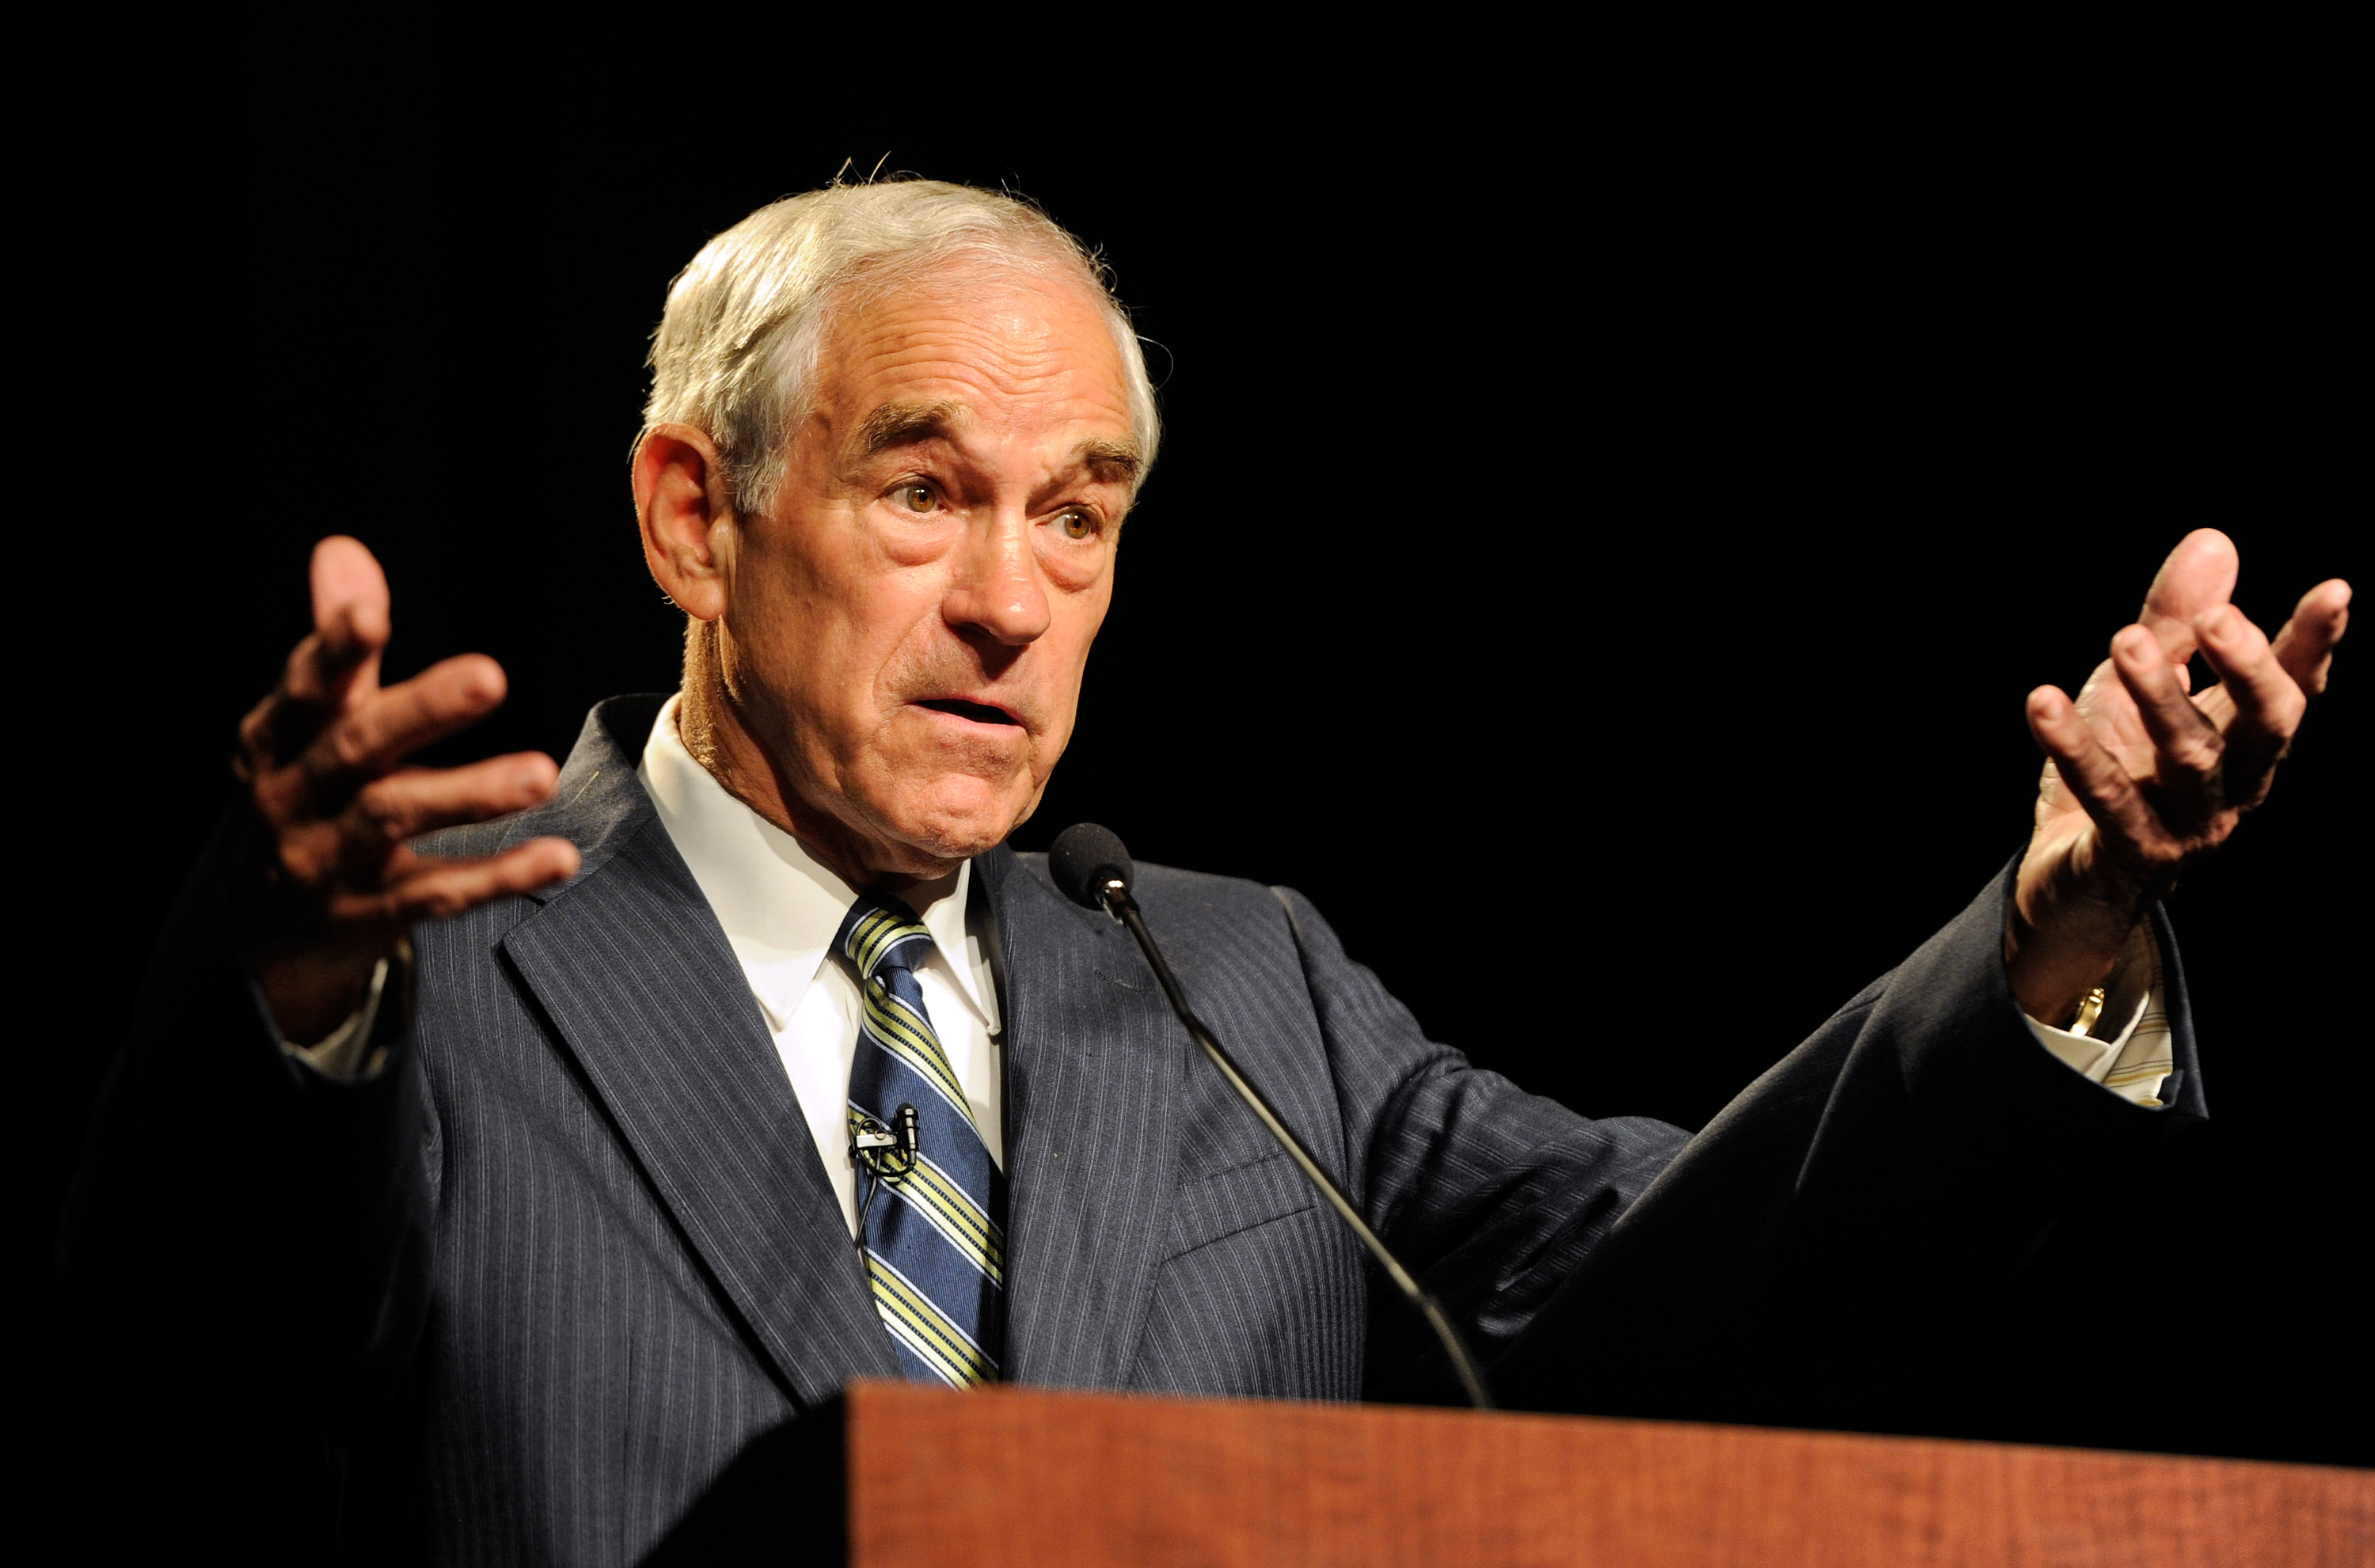 Dr. Ron Paul in Las Vegas, Nevada. (Photo by Ethan Miller/Getty Images)